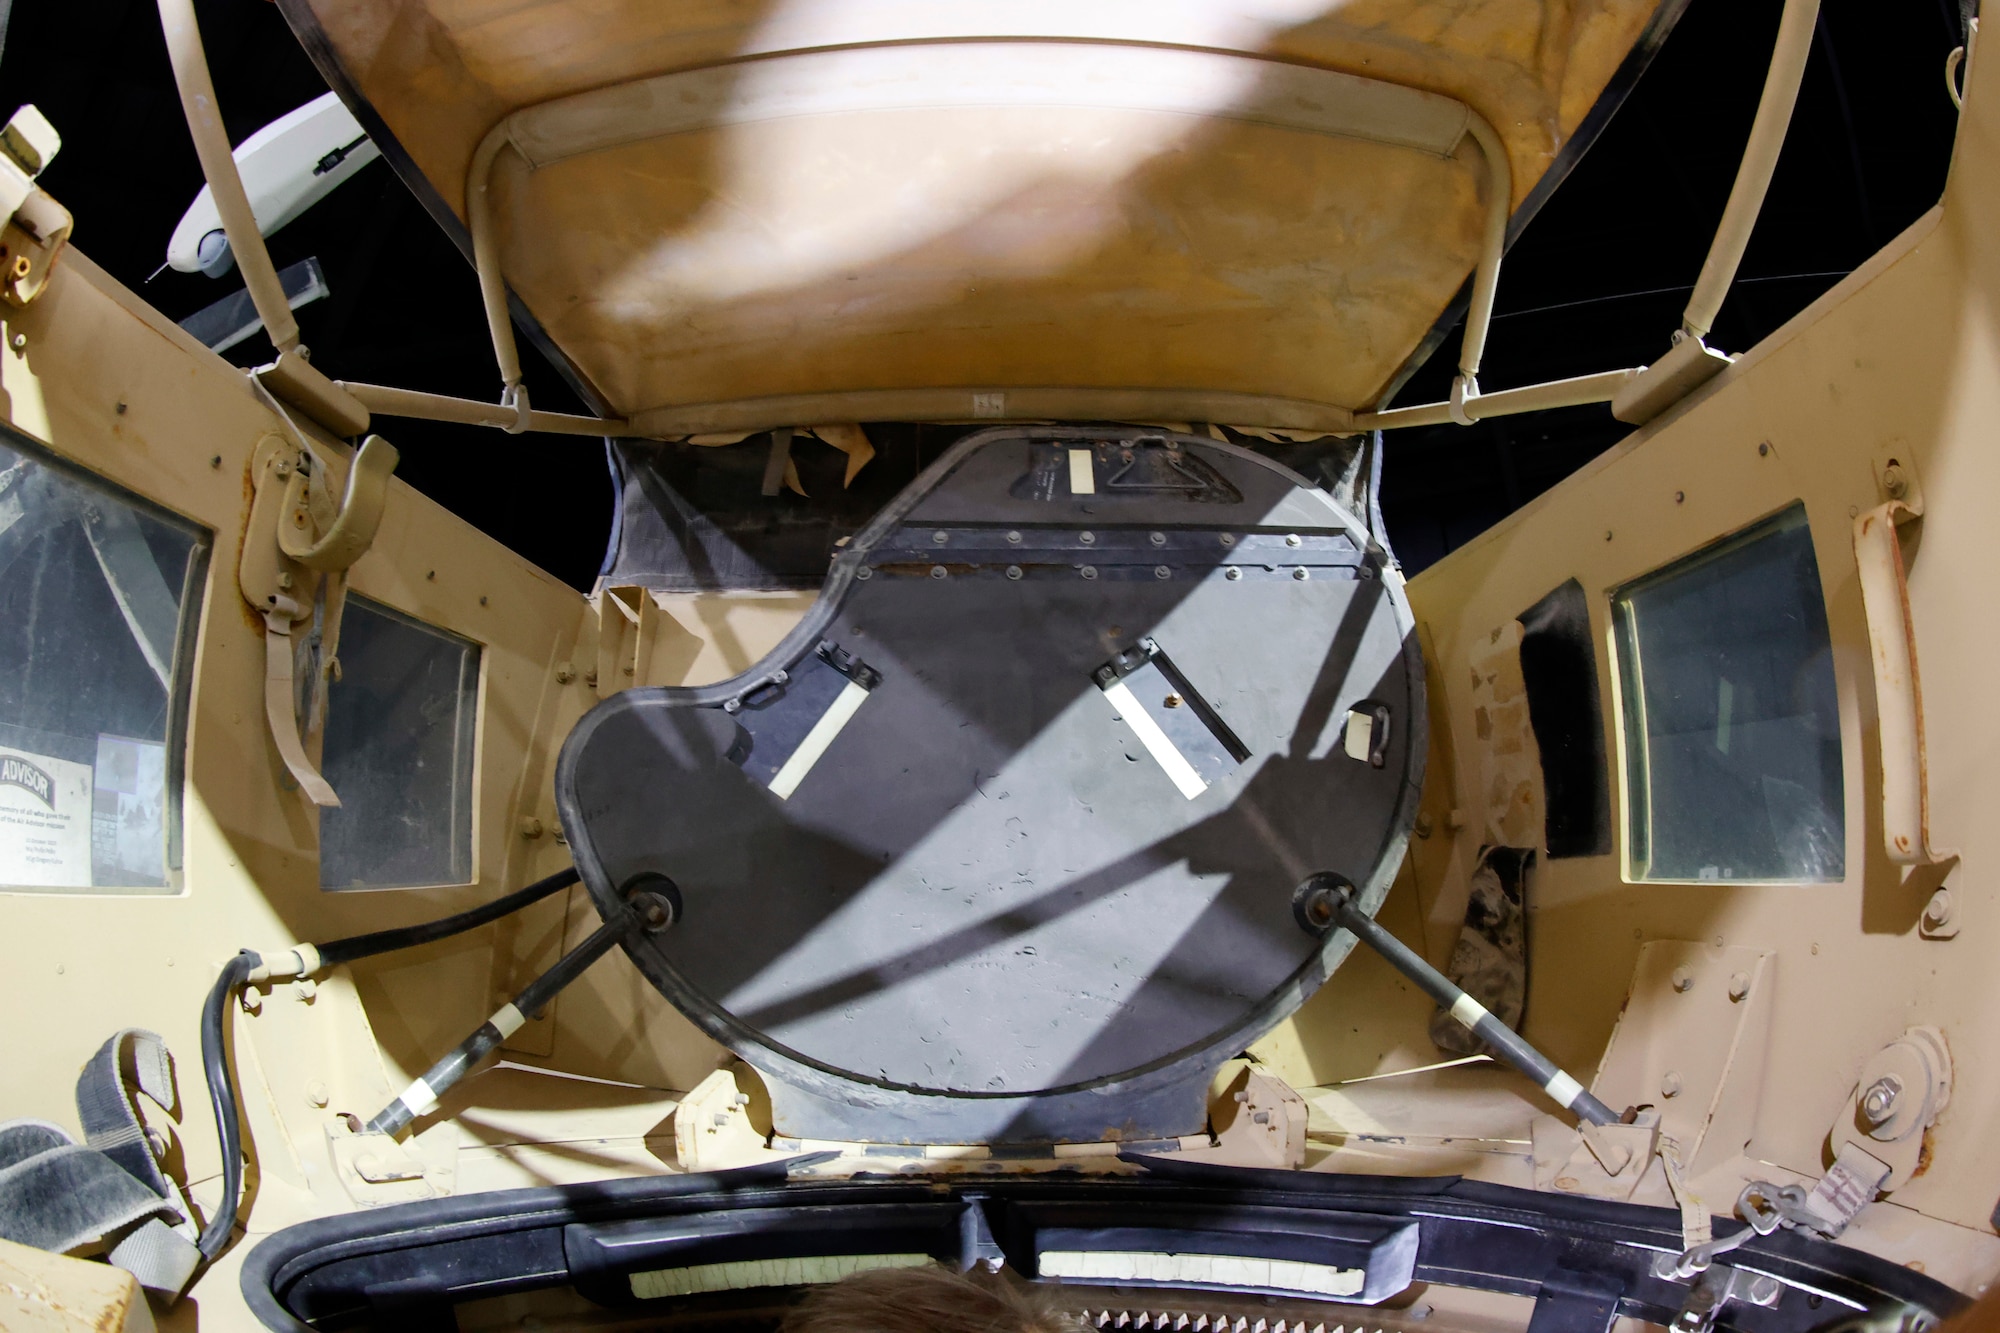 Interior views of the Cougar CAT II A1 MRAP